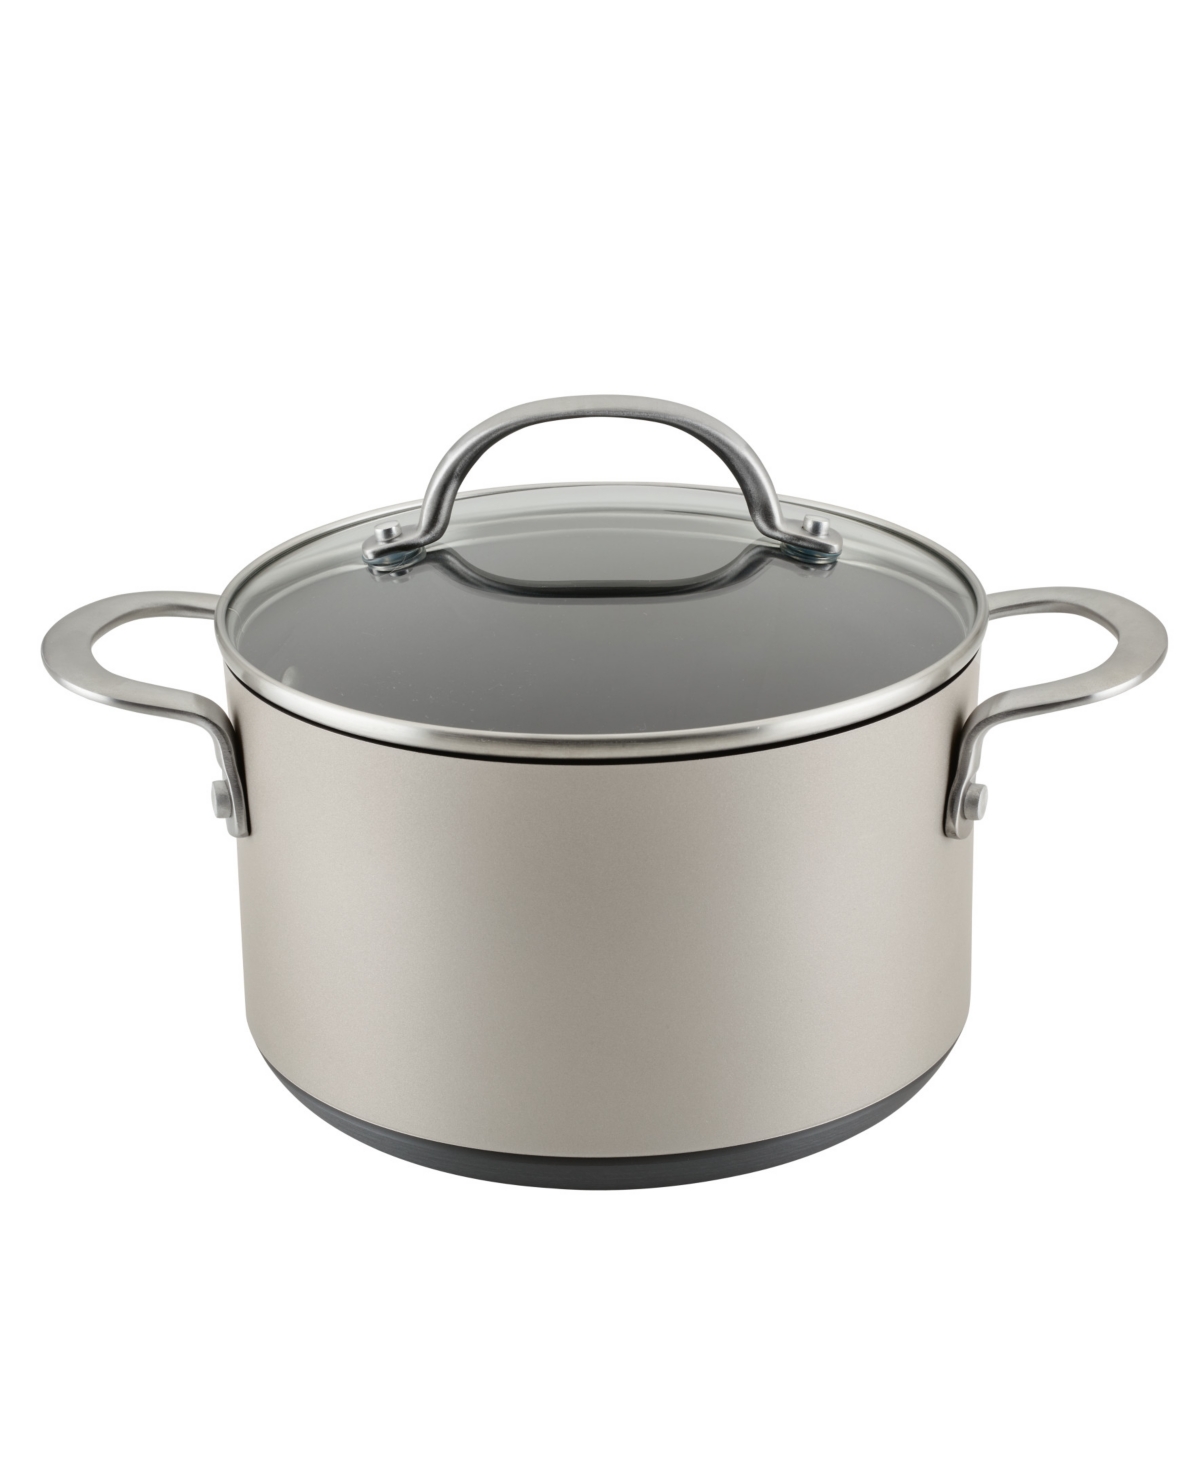 Anolon Achieve Hard Anodized Nonstick 4 Quart Saucepot With Lid In Silver